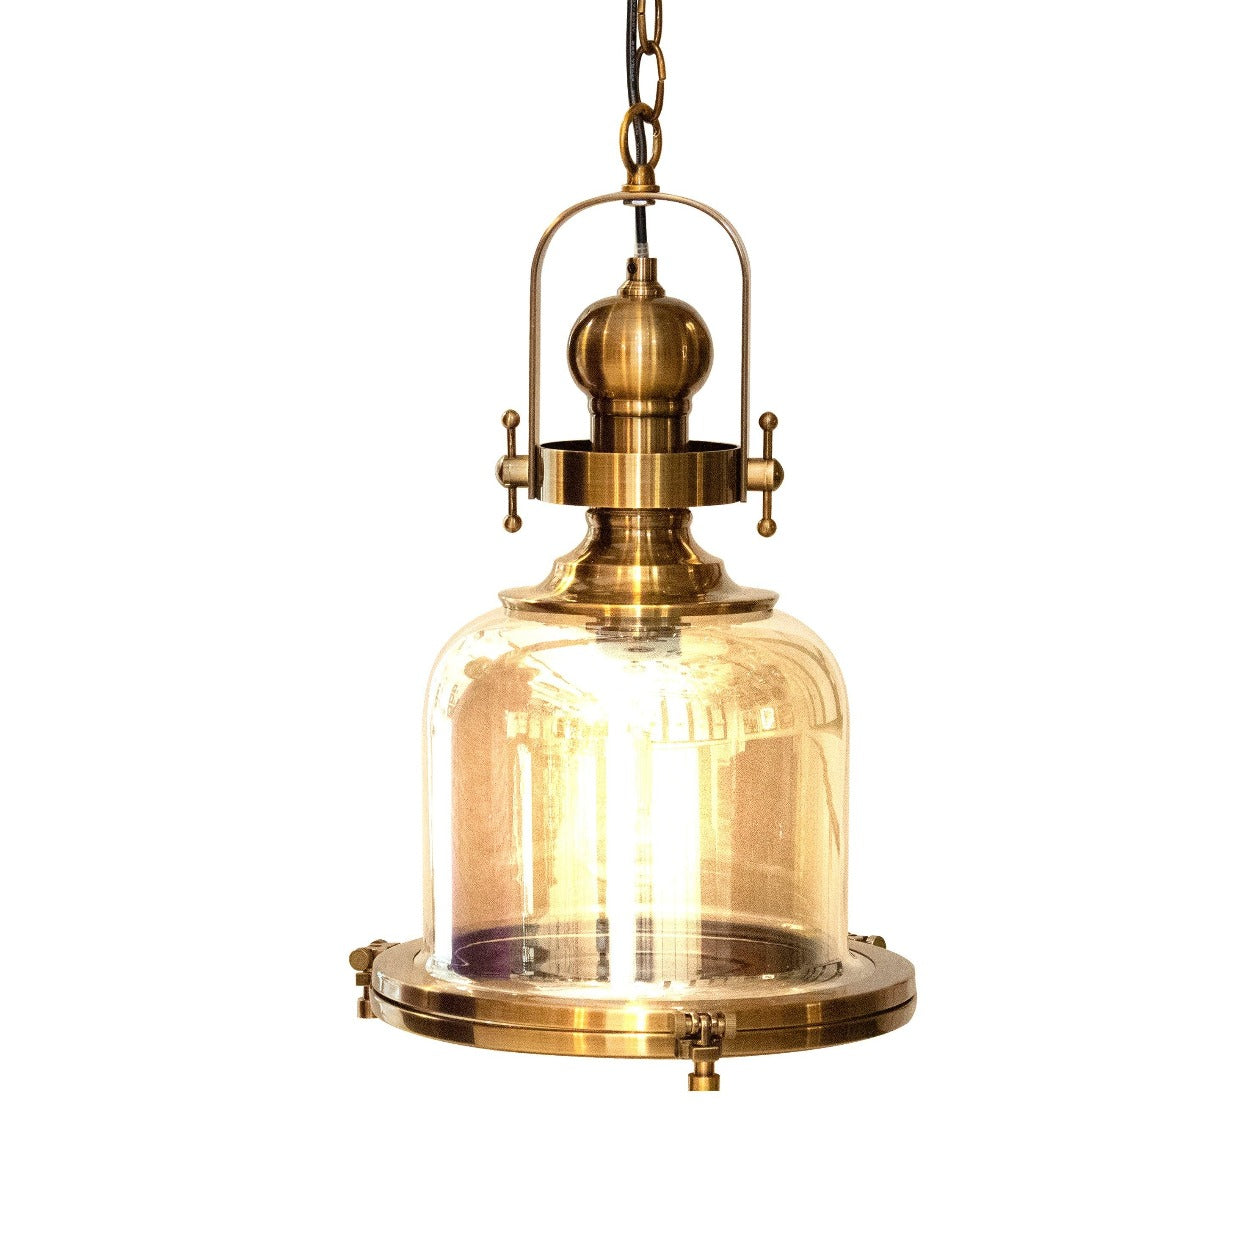 ANTIQUE BRASS GLASS CYLINDER HANGING LIGHT at the lowest price in